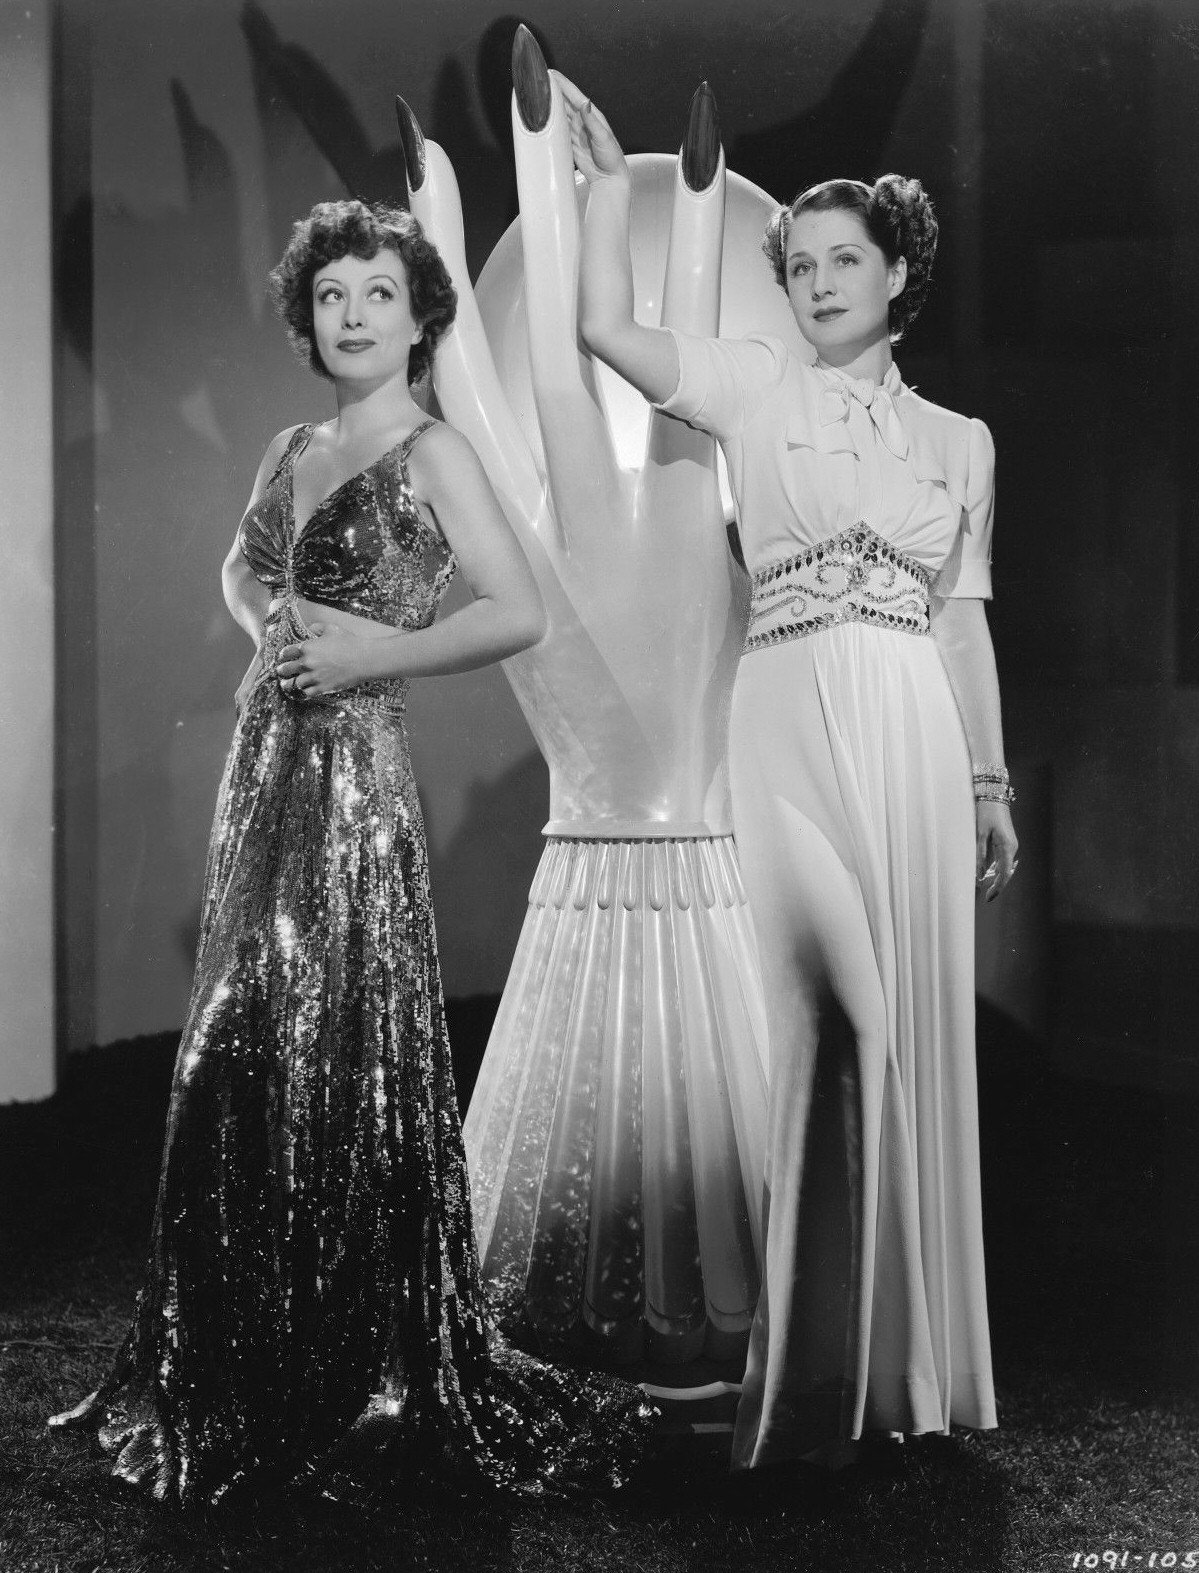 1939. Publicity for 'The Women' with Norma Shearer.